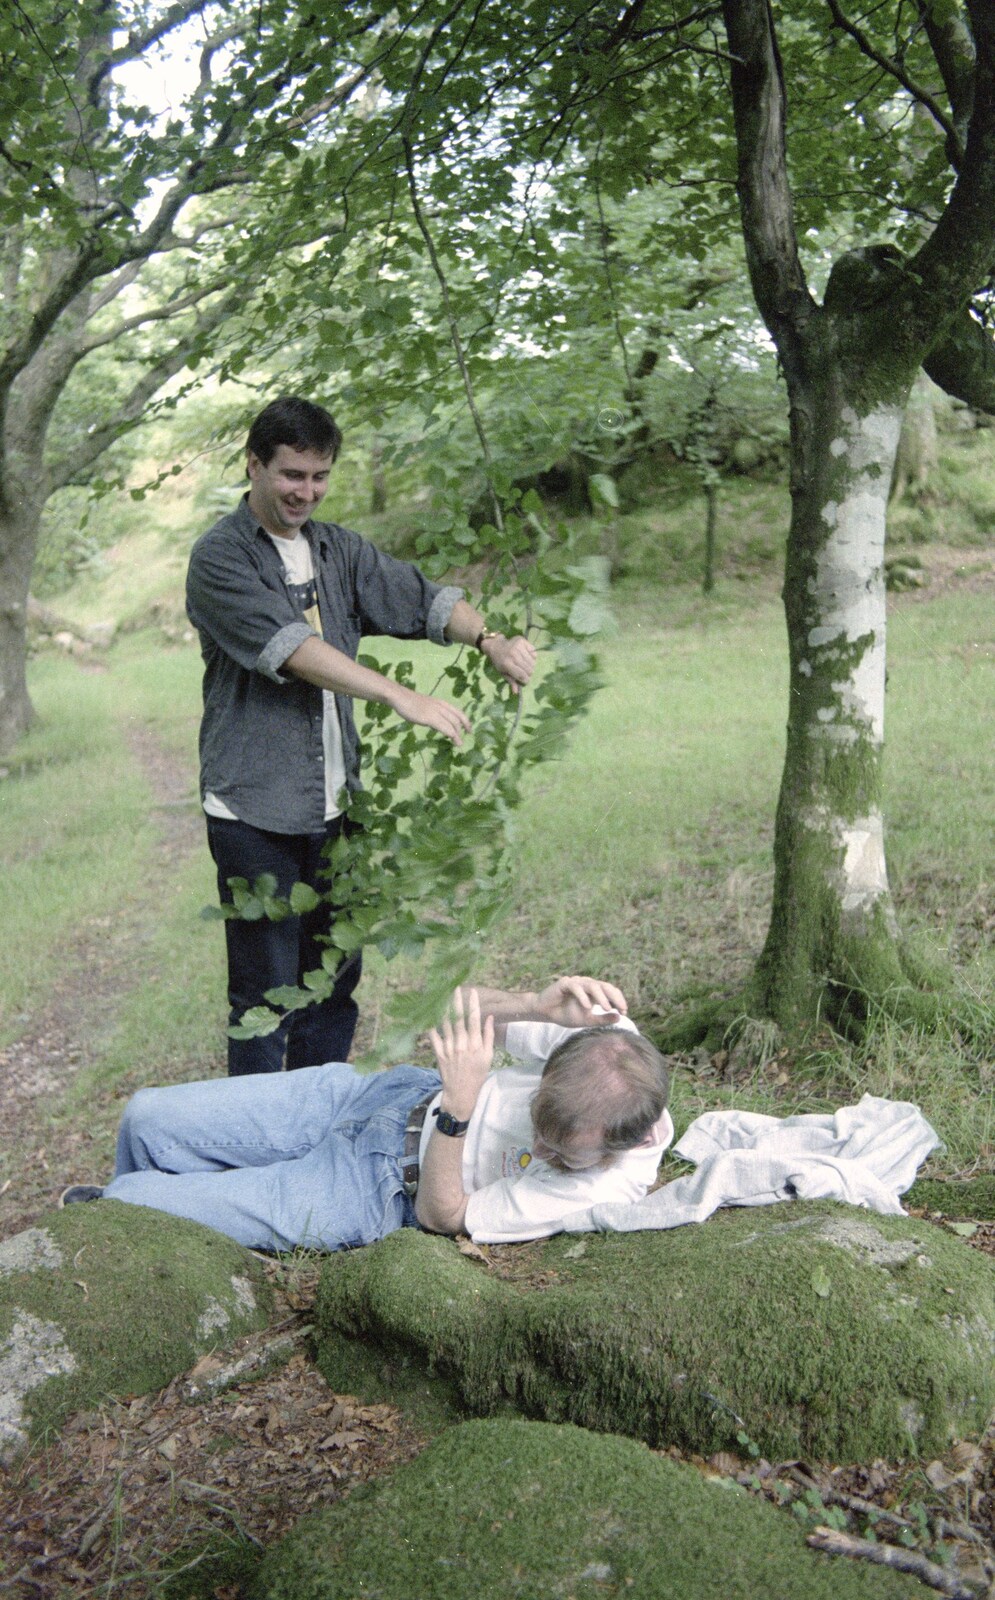 Rik's found a bit of tree to poke Dave with from A Trip to Mutton Cove, Plymouth, Devon - 15th May 1993